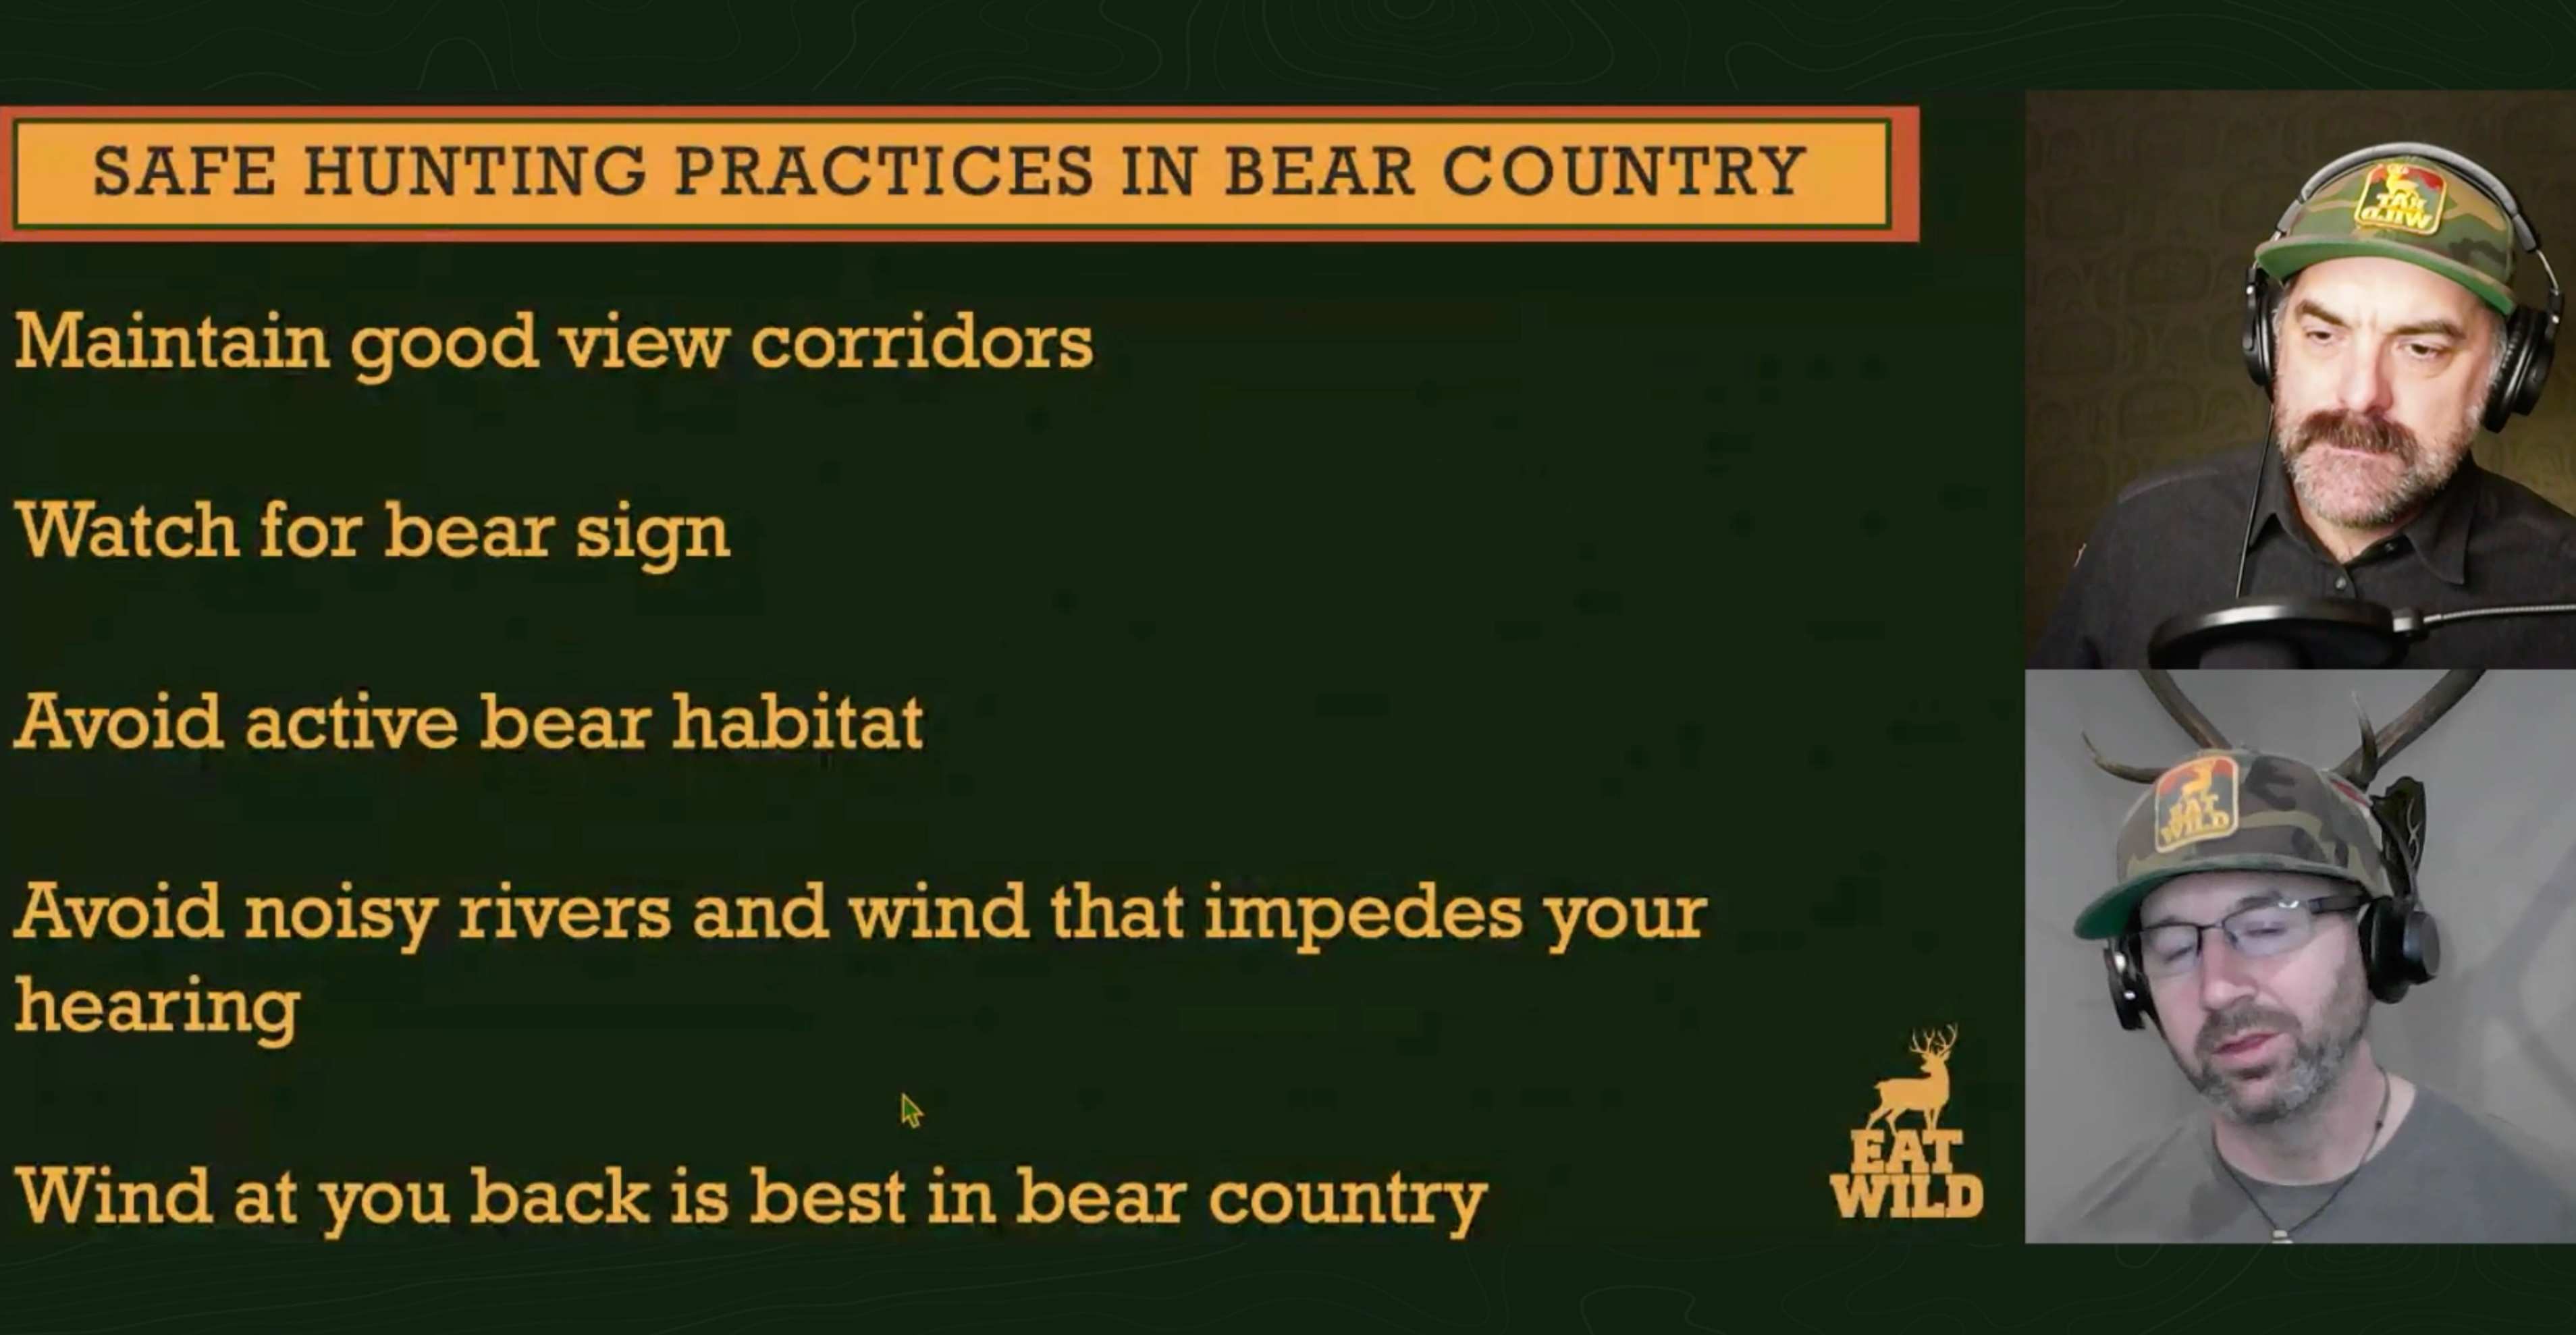 Bear Safety on the Hunt - How to avoid bear encounters while hunting and foraging